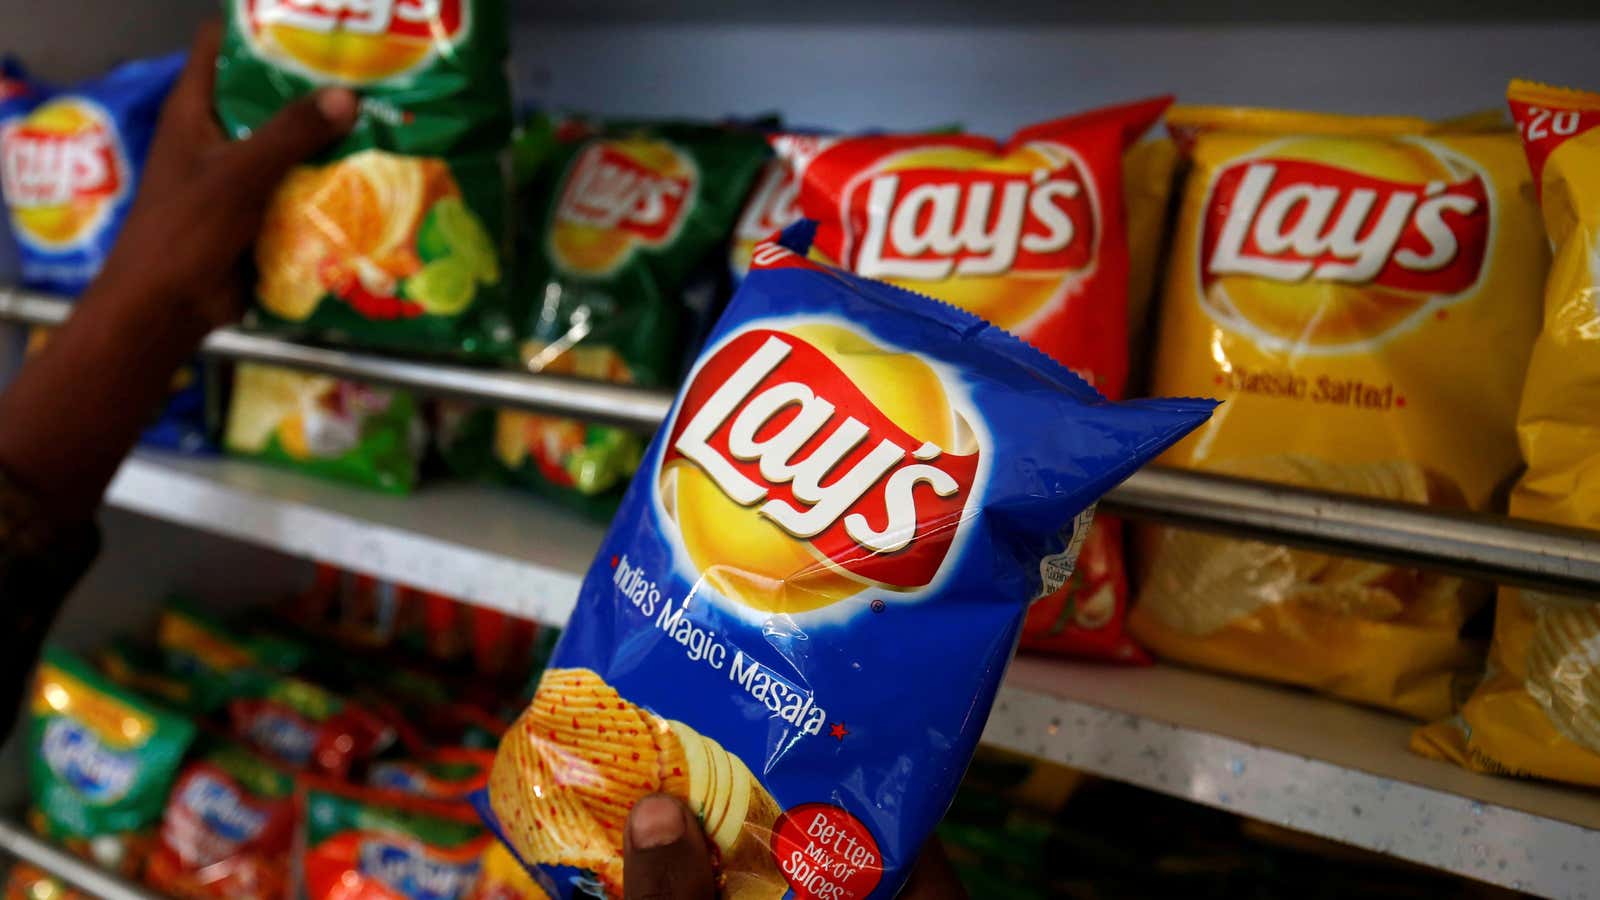 In India, the reputation of Lay’s potato chips took a blow.